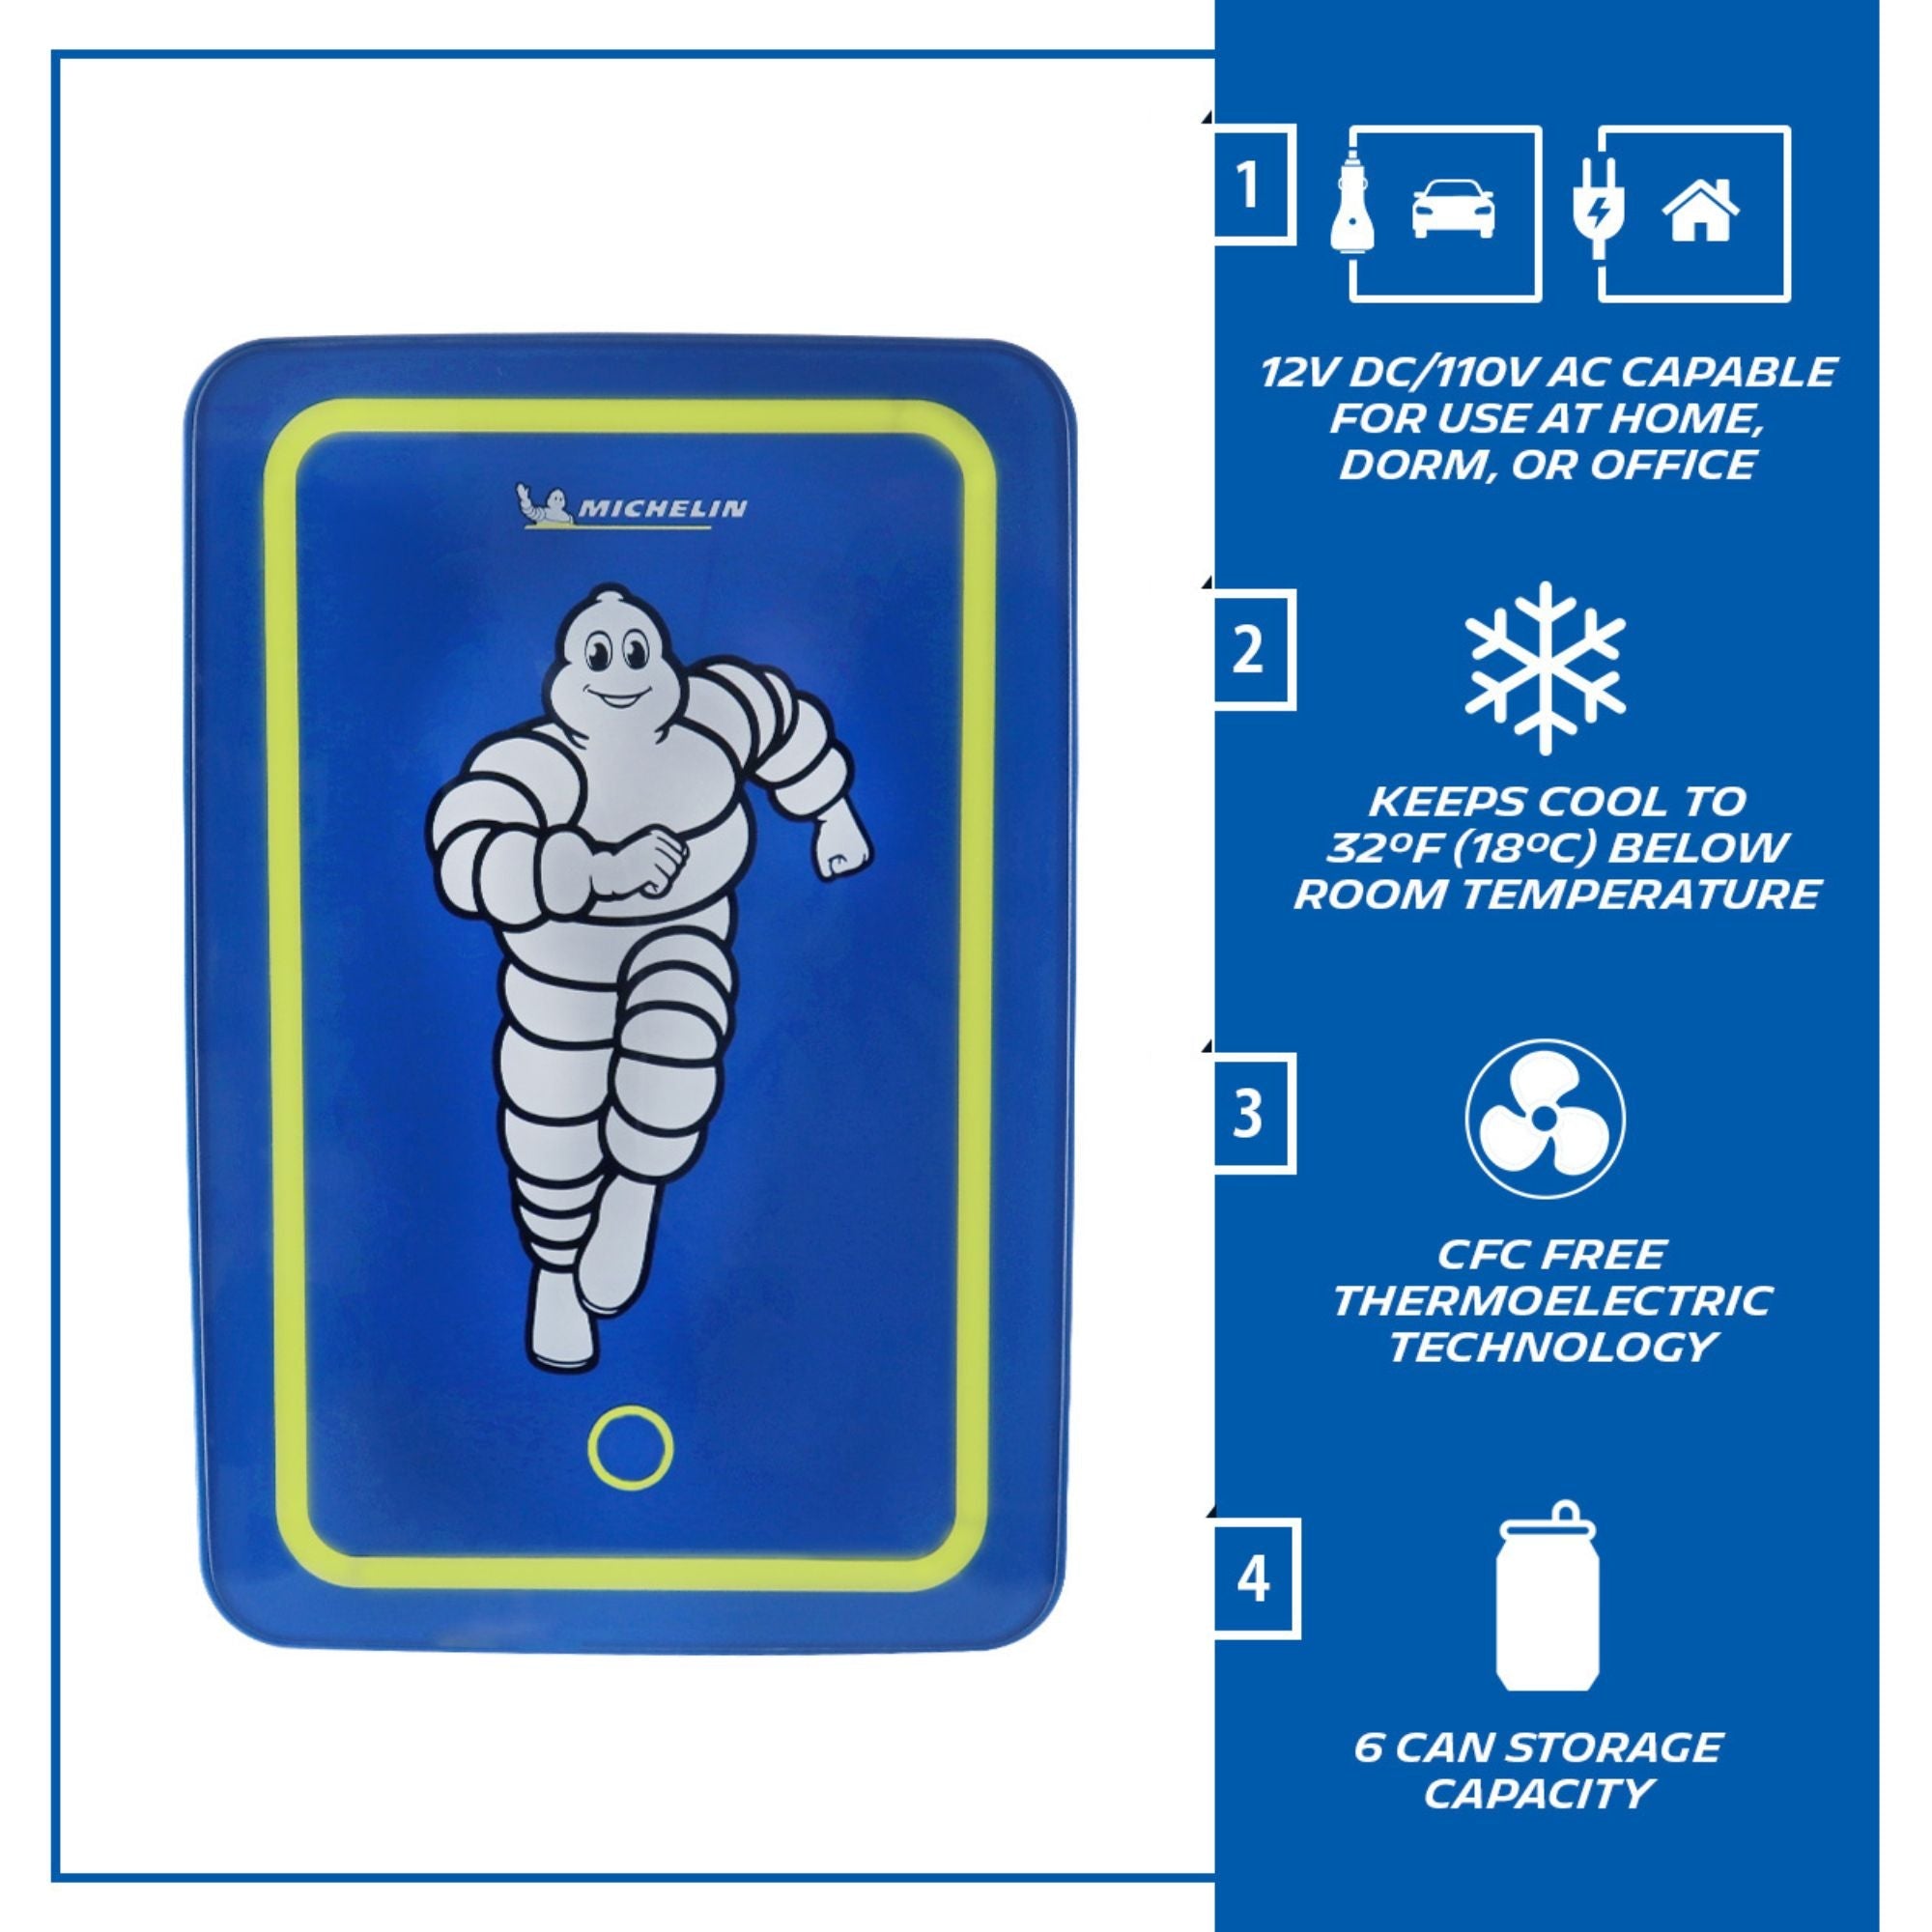 Michelin mini fridge on a white background with text and icons to the right reading describing features: 12V DC/110V AC compatible for use at home, dorm, or office; Keeps cool to 32F (18C) below room temperature; CFC free thermoelectric technology; 6 can storage capacity